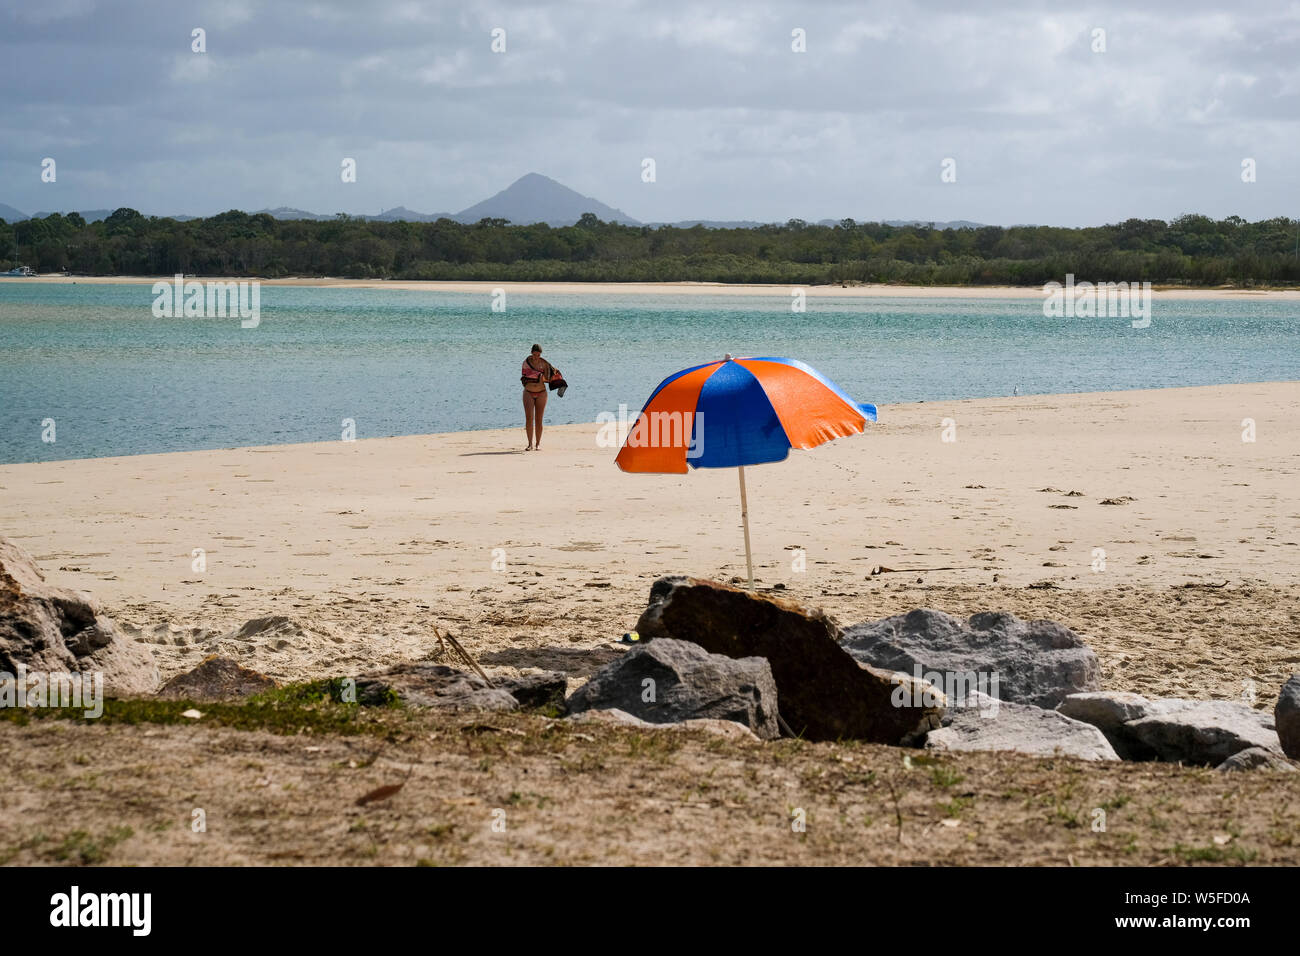 A swimmer emerges from the water on an isolated beach and returns to her beach umbrella Stock Photo